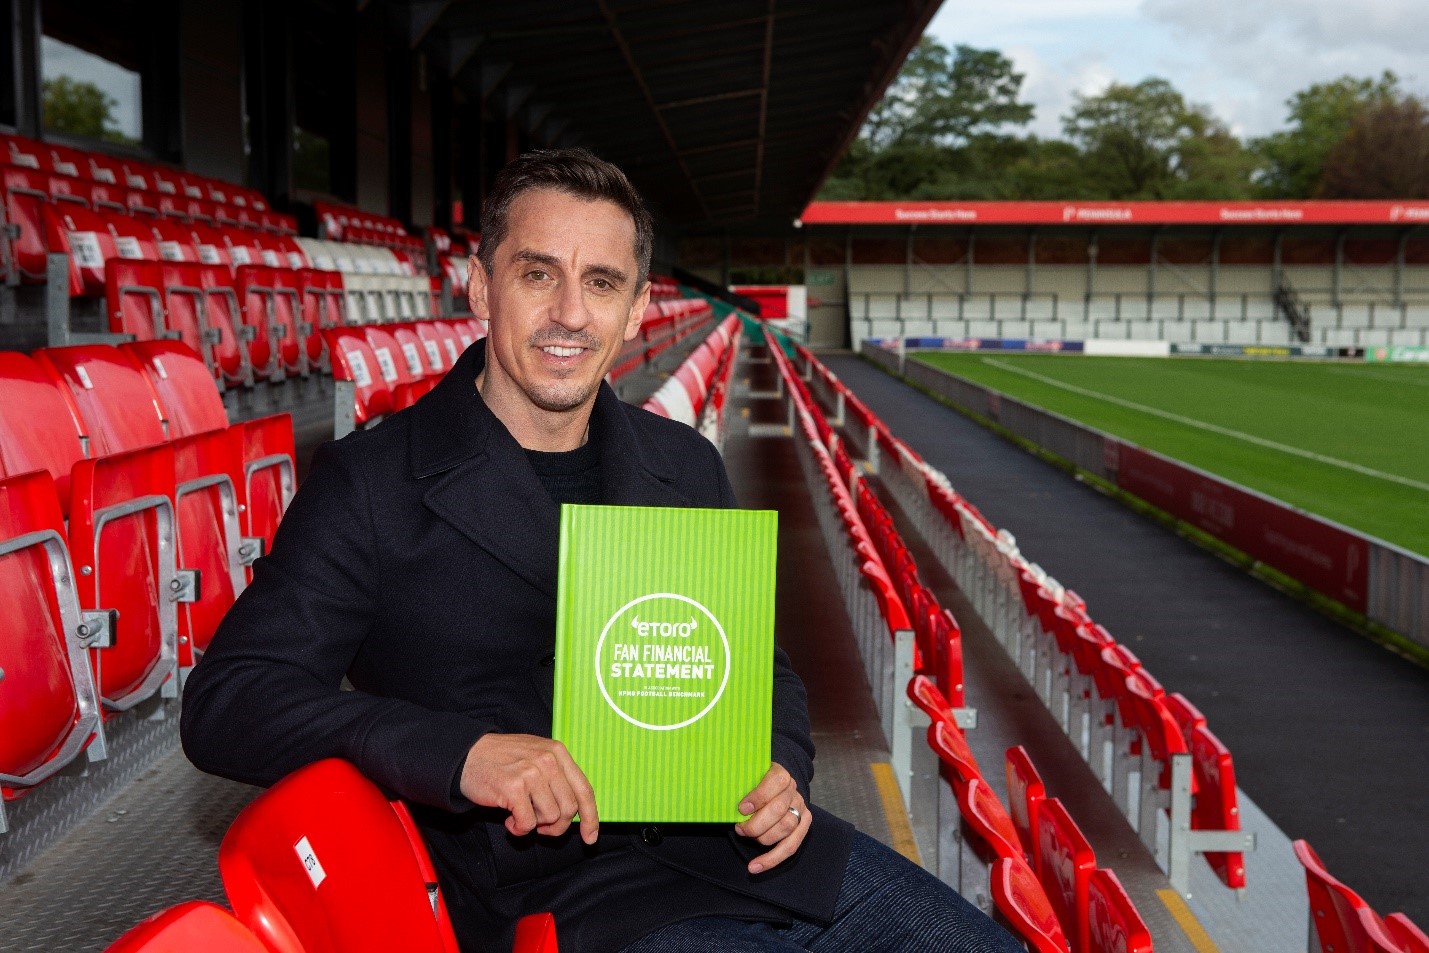 For further commentary by Gary Neville and to download the full report visit etoroFC.com